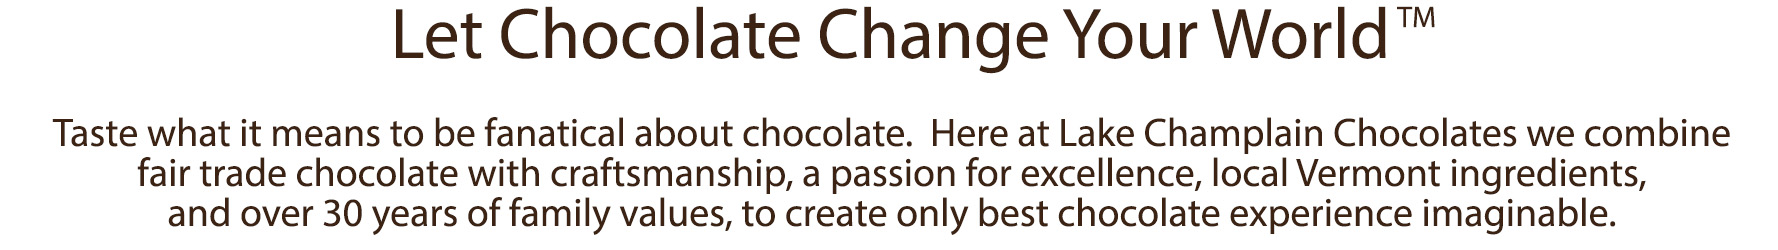 Let Chocolate Change Your World